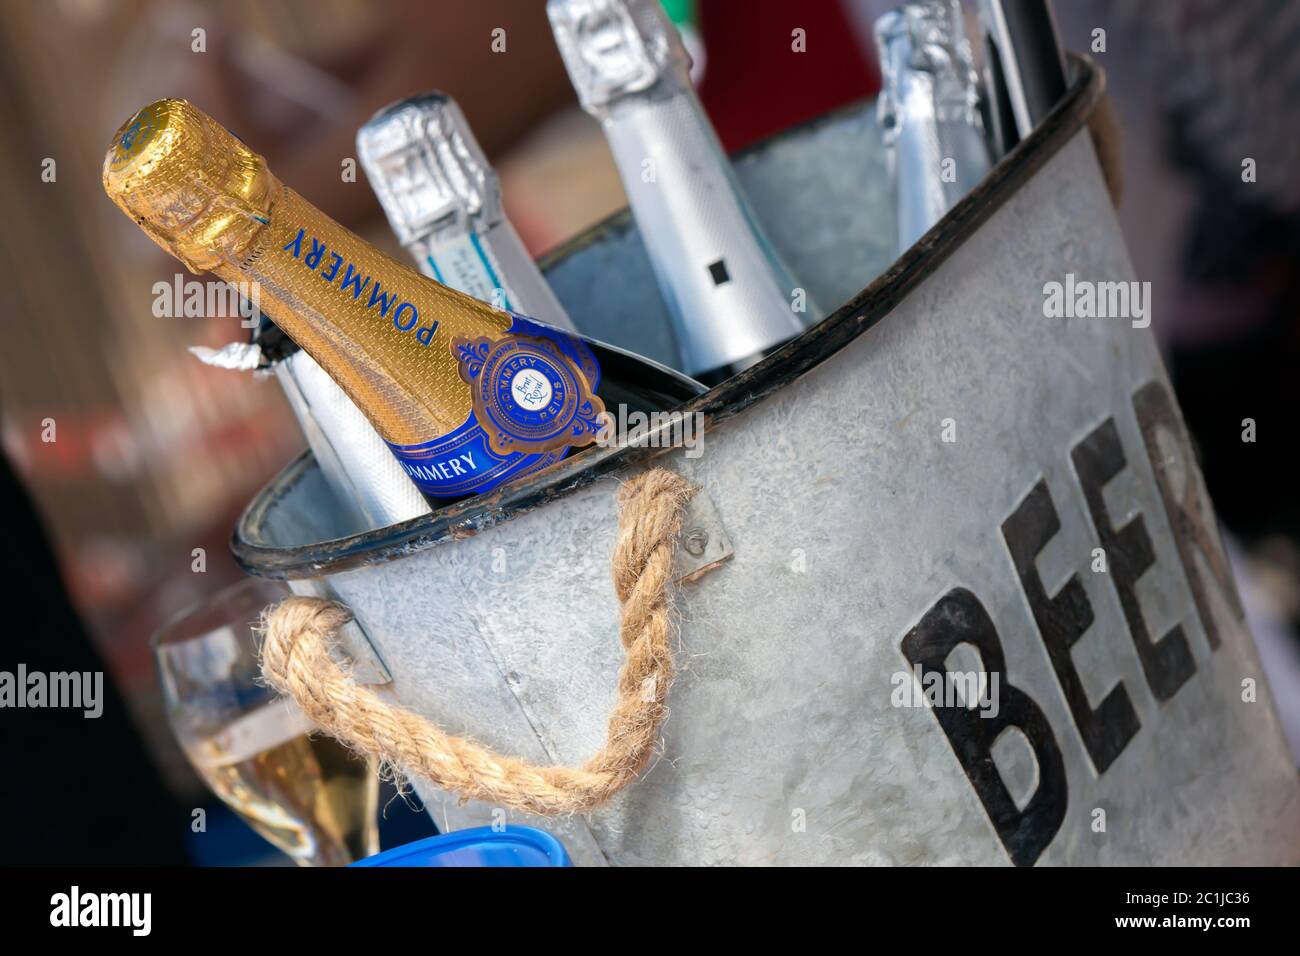 Bottle of Pommery champagne chilling in a beer bucket during a food festival. Stock Photo